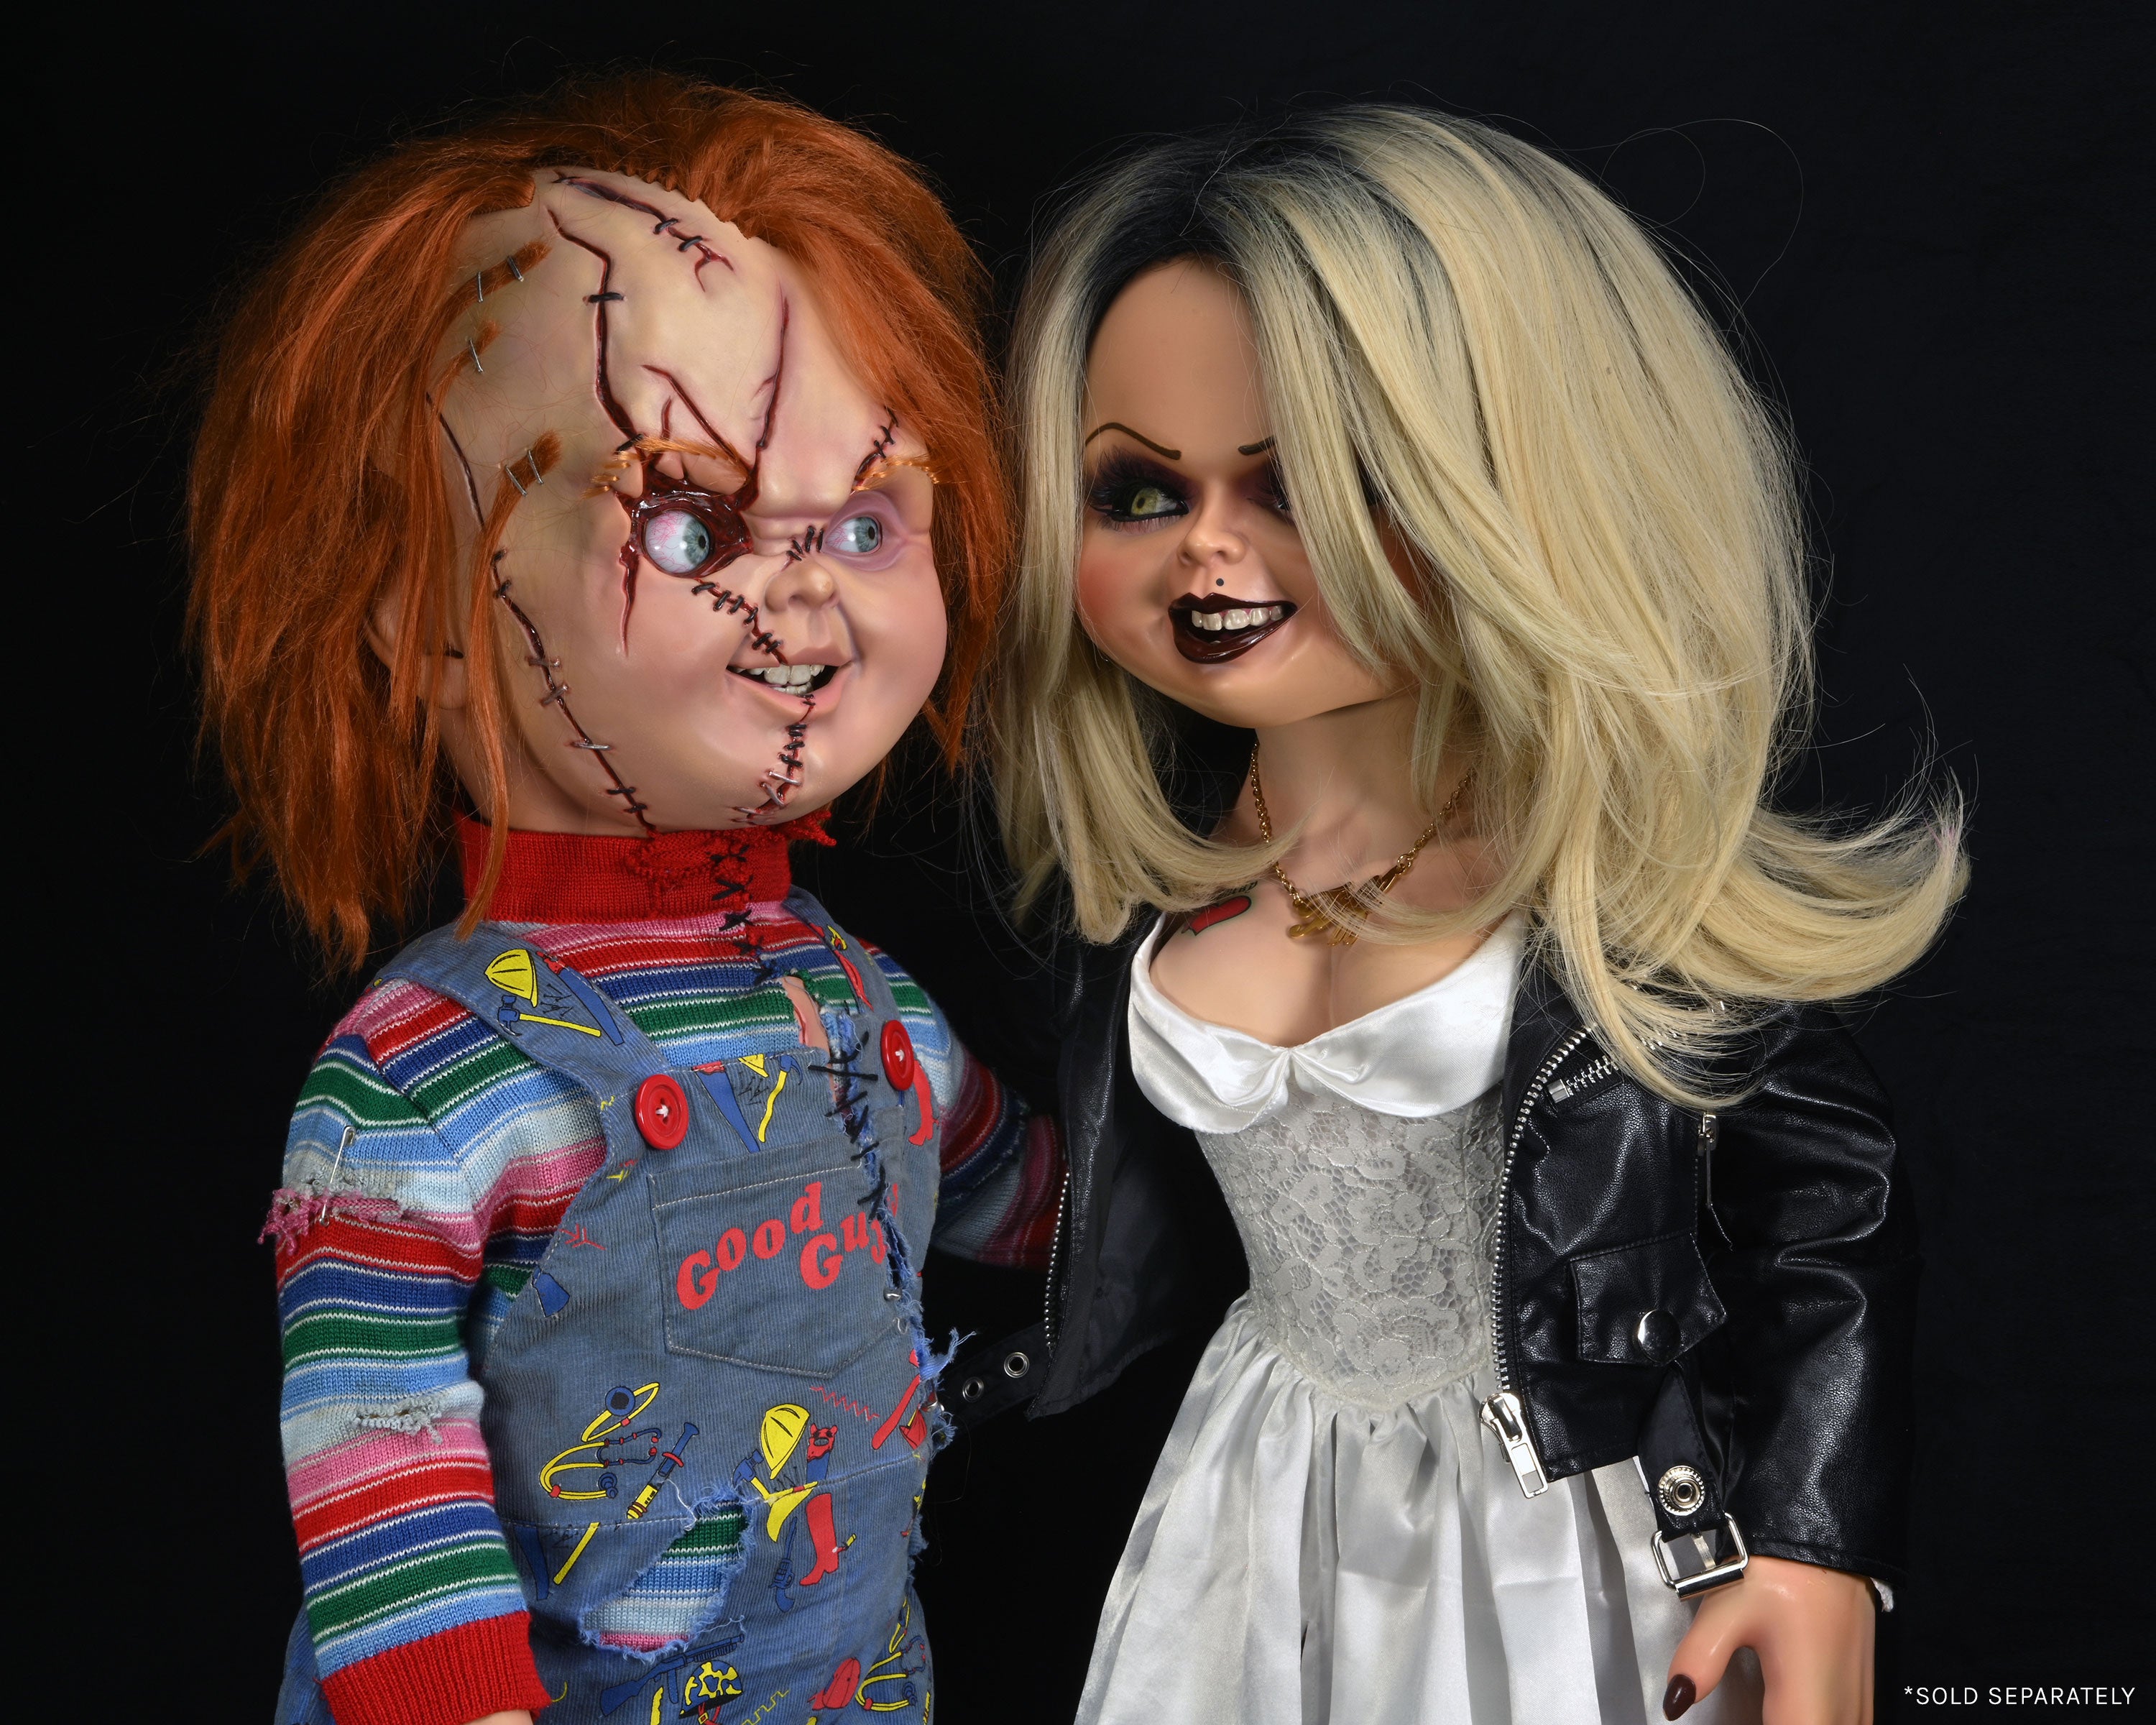 Chucky and Tiffany Dolls life-size prop replicas